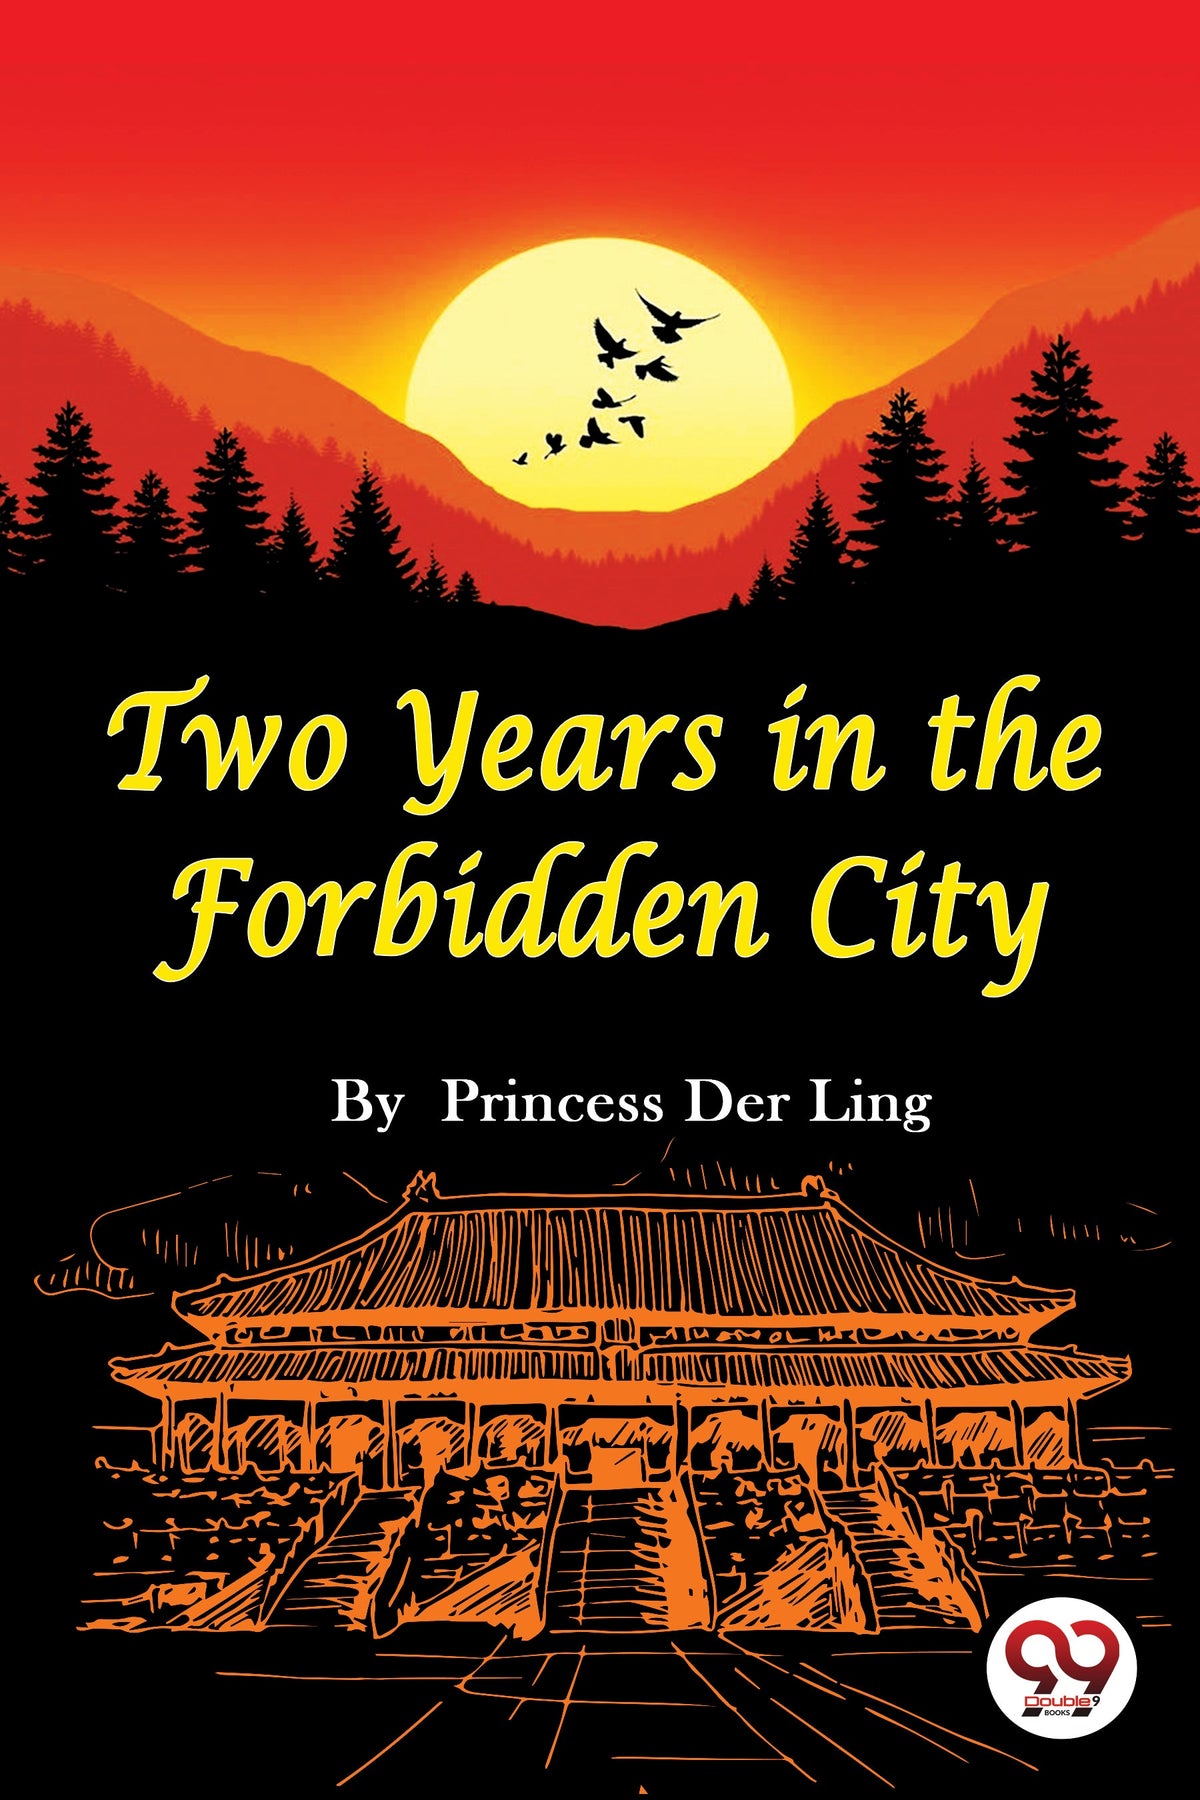 Two Years In the Forbidden City